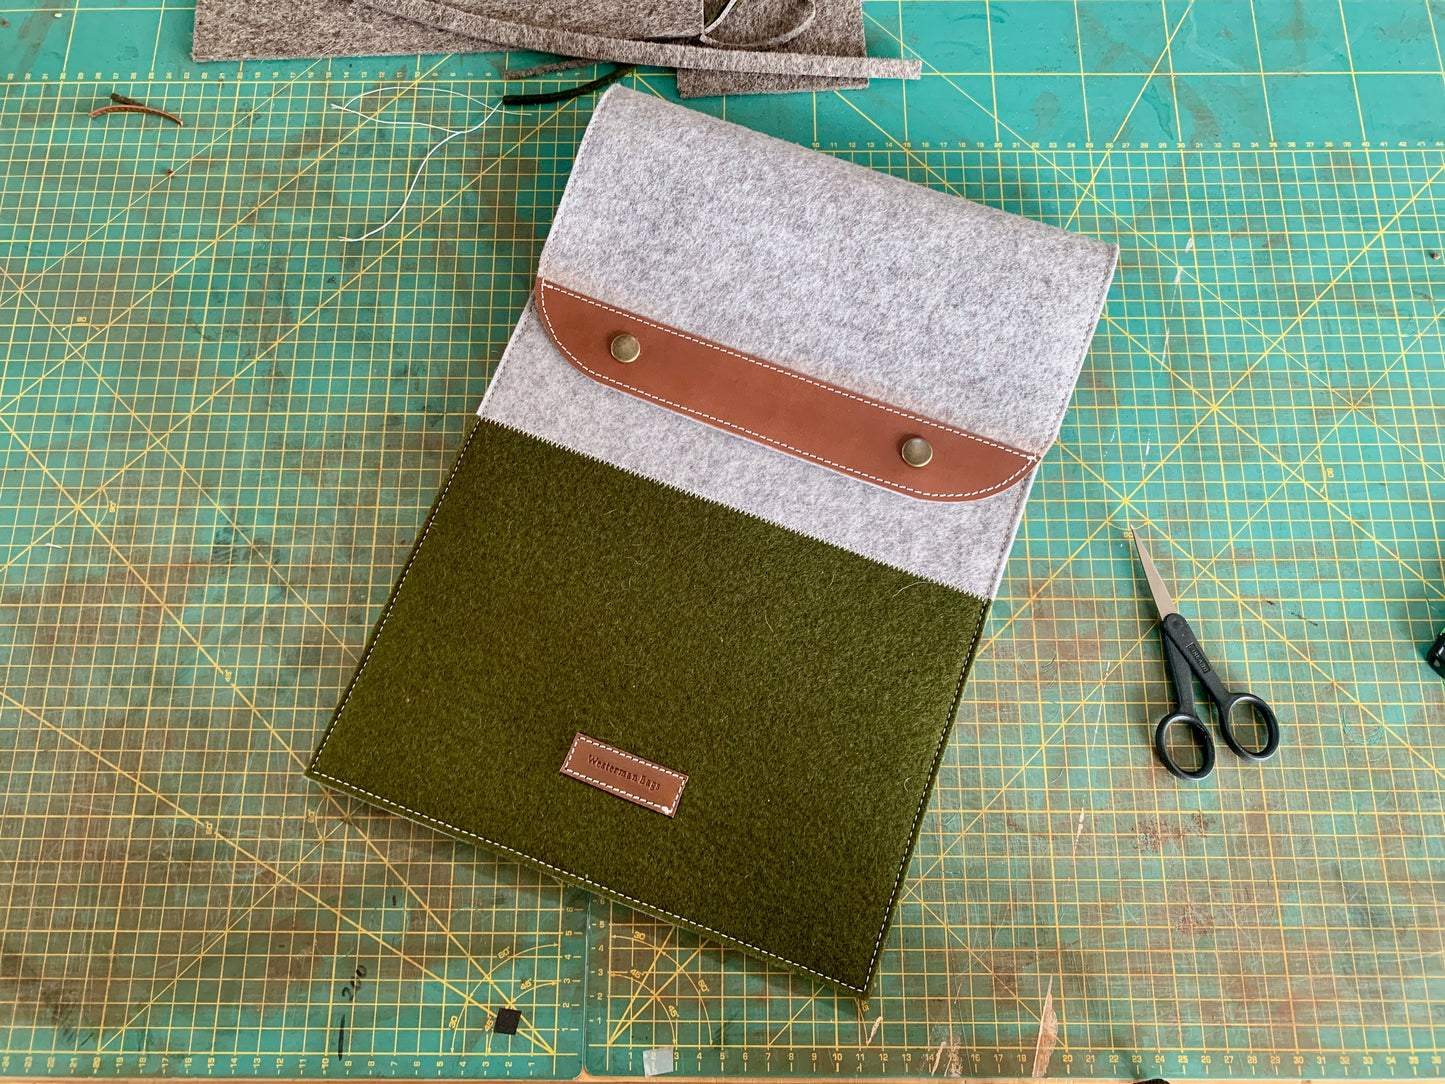 SALE - 16 "Contrast Classic Case - MacBook cover with valve closure in moss green and gray.